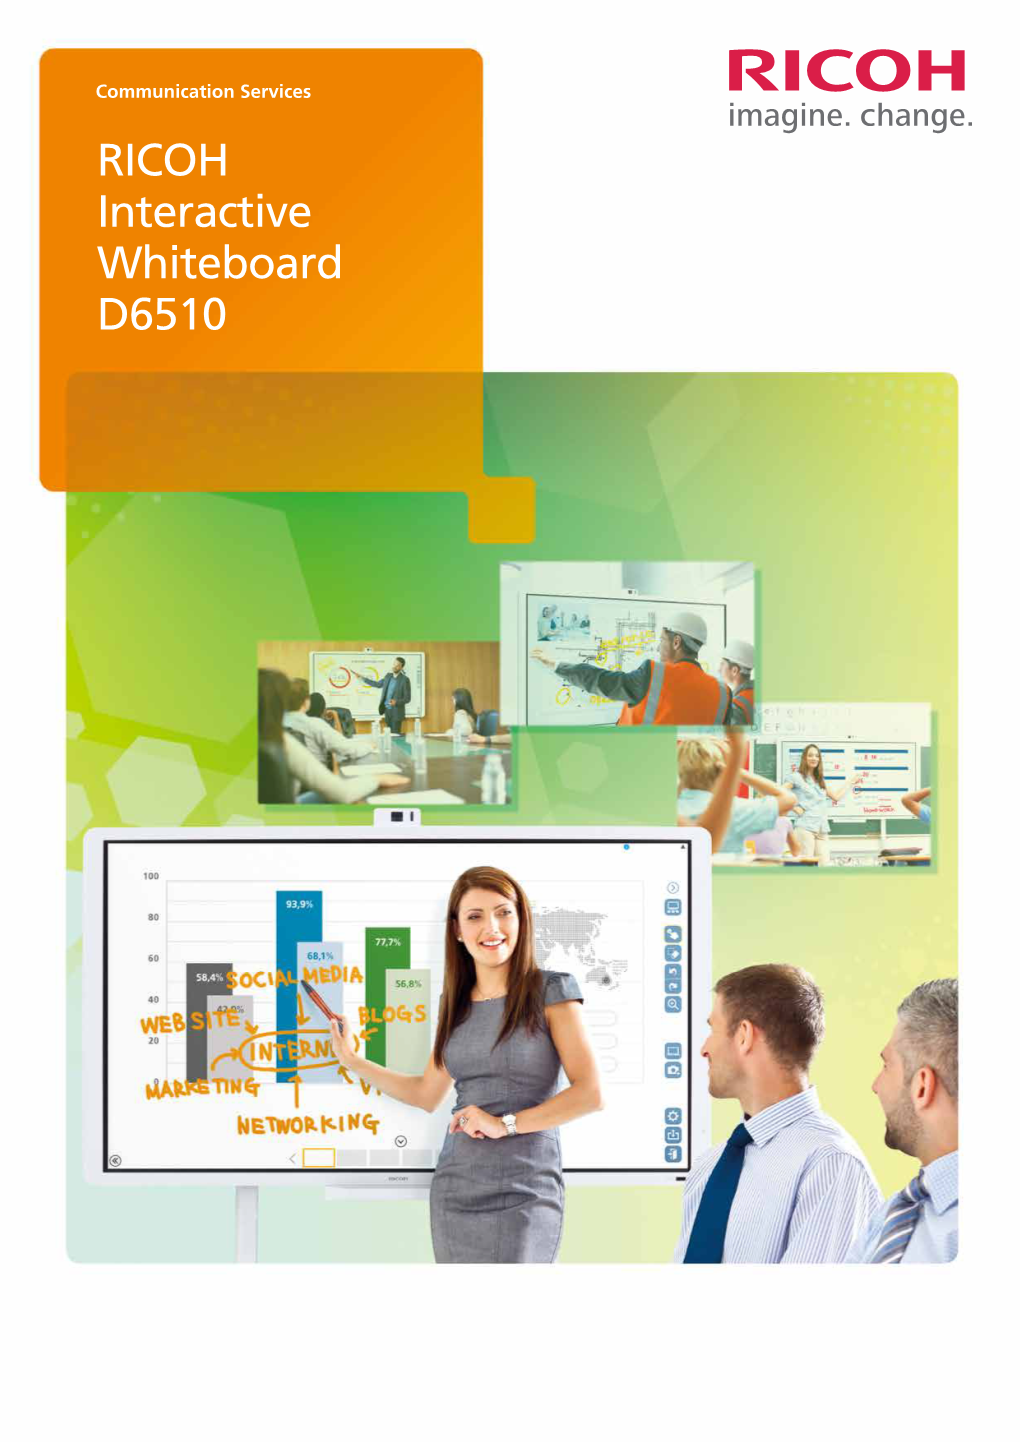 RICOH Interactive Whiteboard D6510 Update Your Workstyle